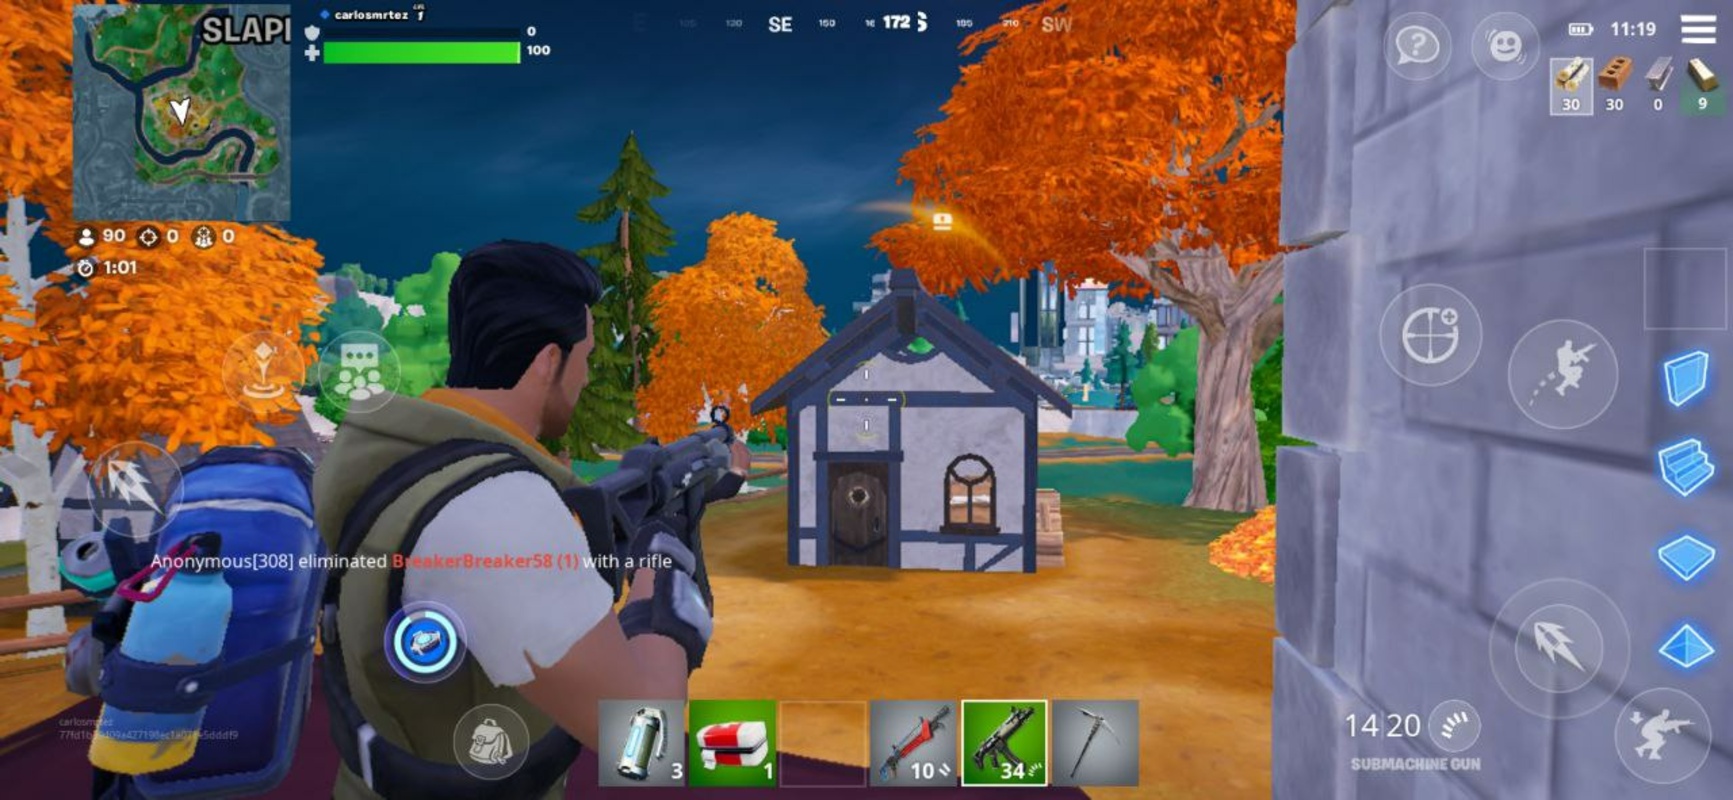 Fortnite 29.10.0-32391220-Android APK for Android Screenshot 7